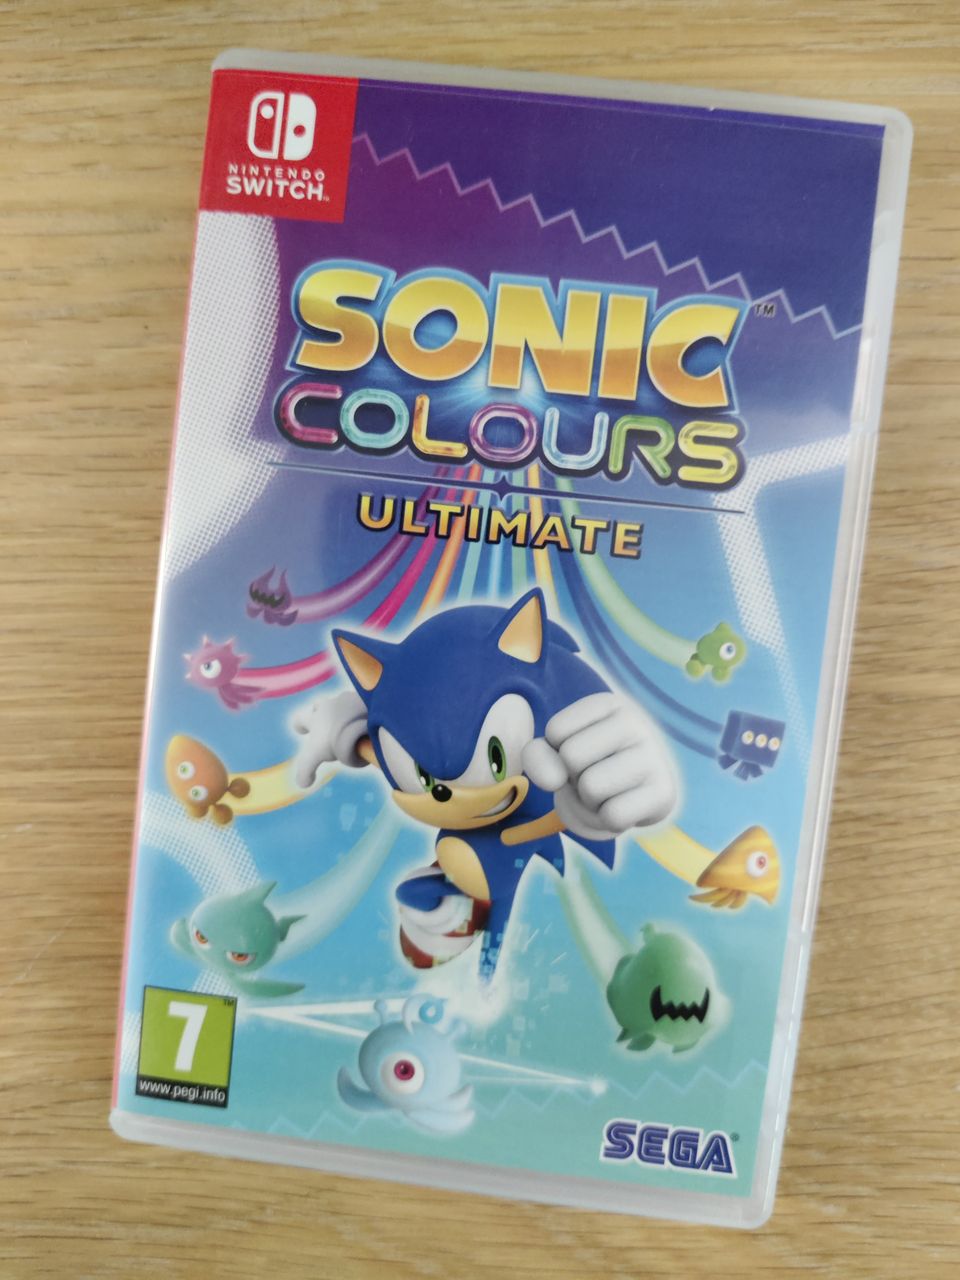 Sonic colours ultimate Nintendo switch